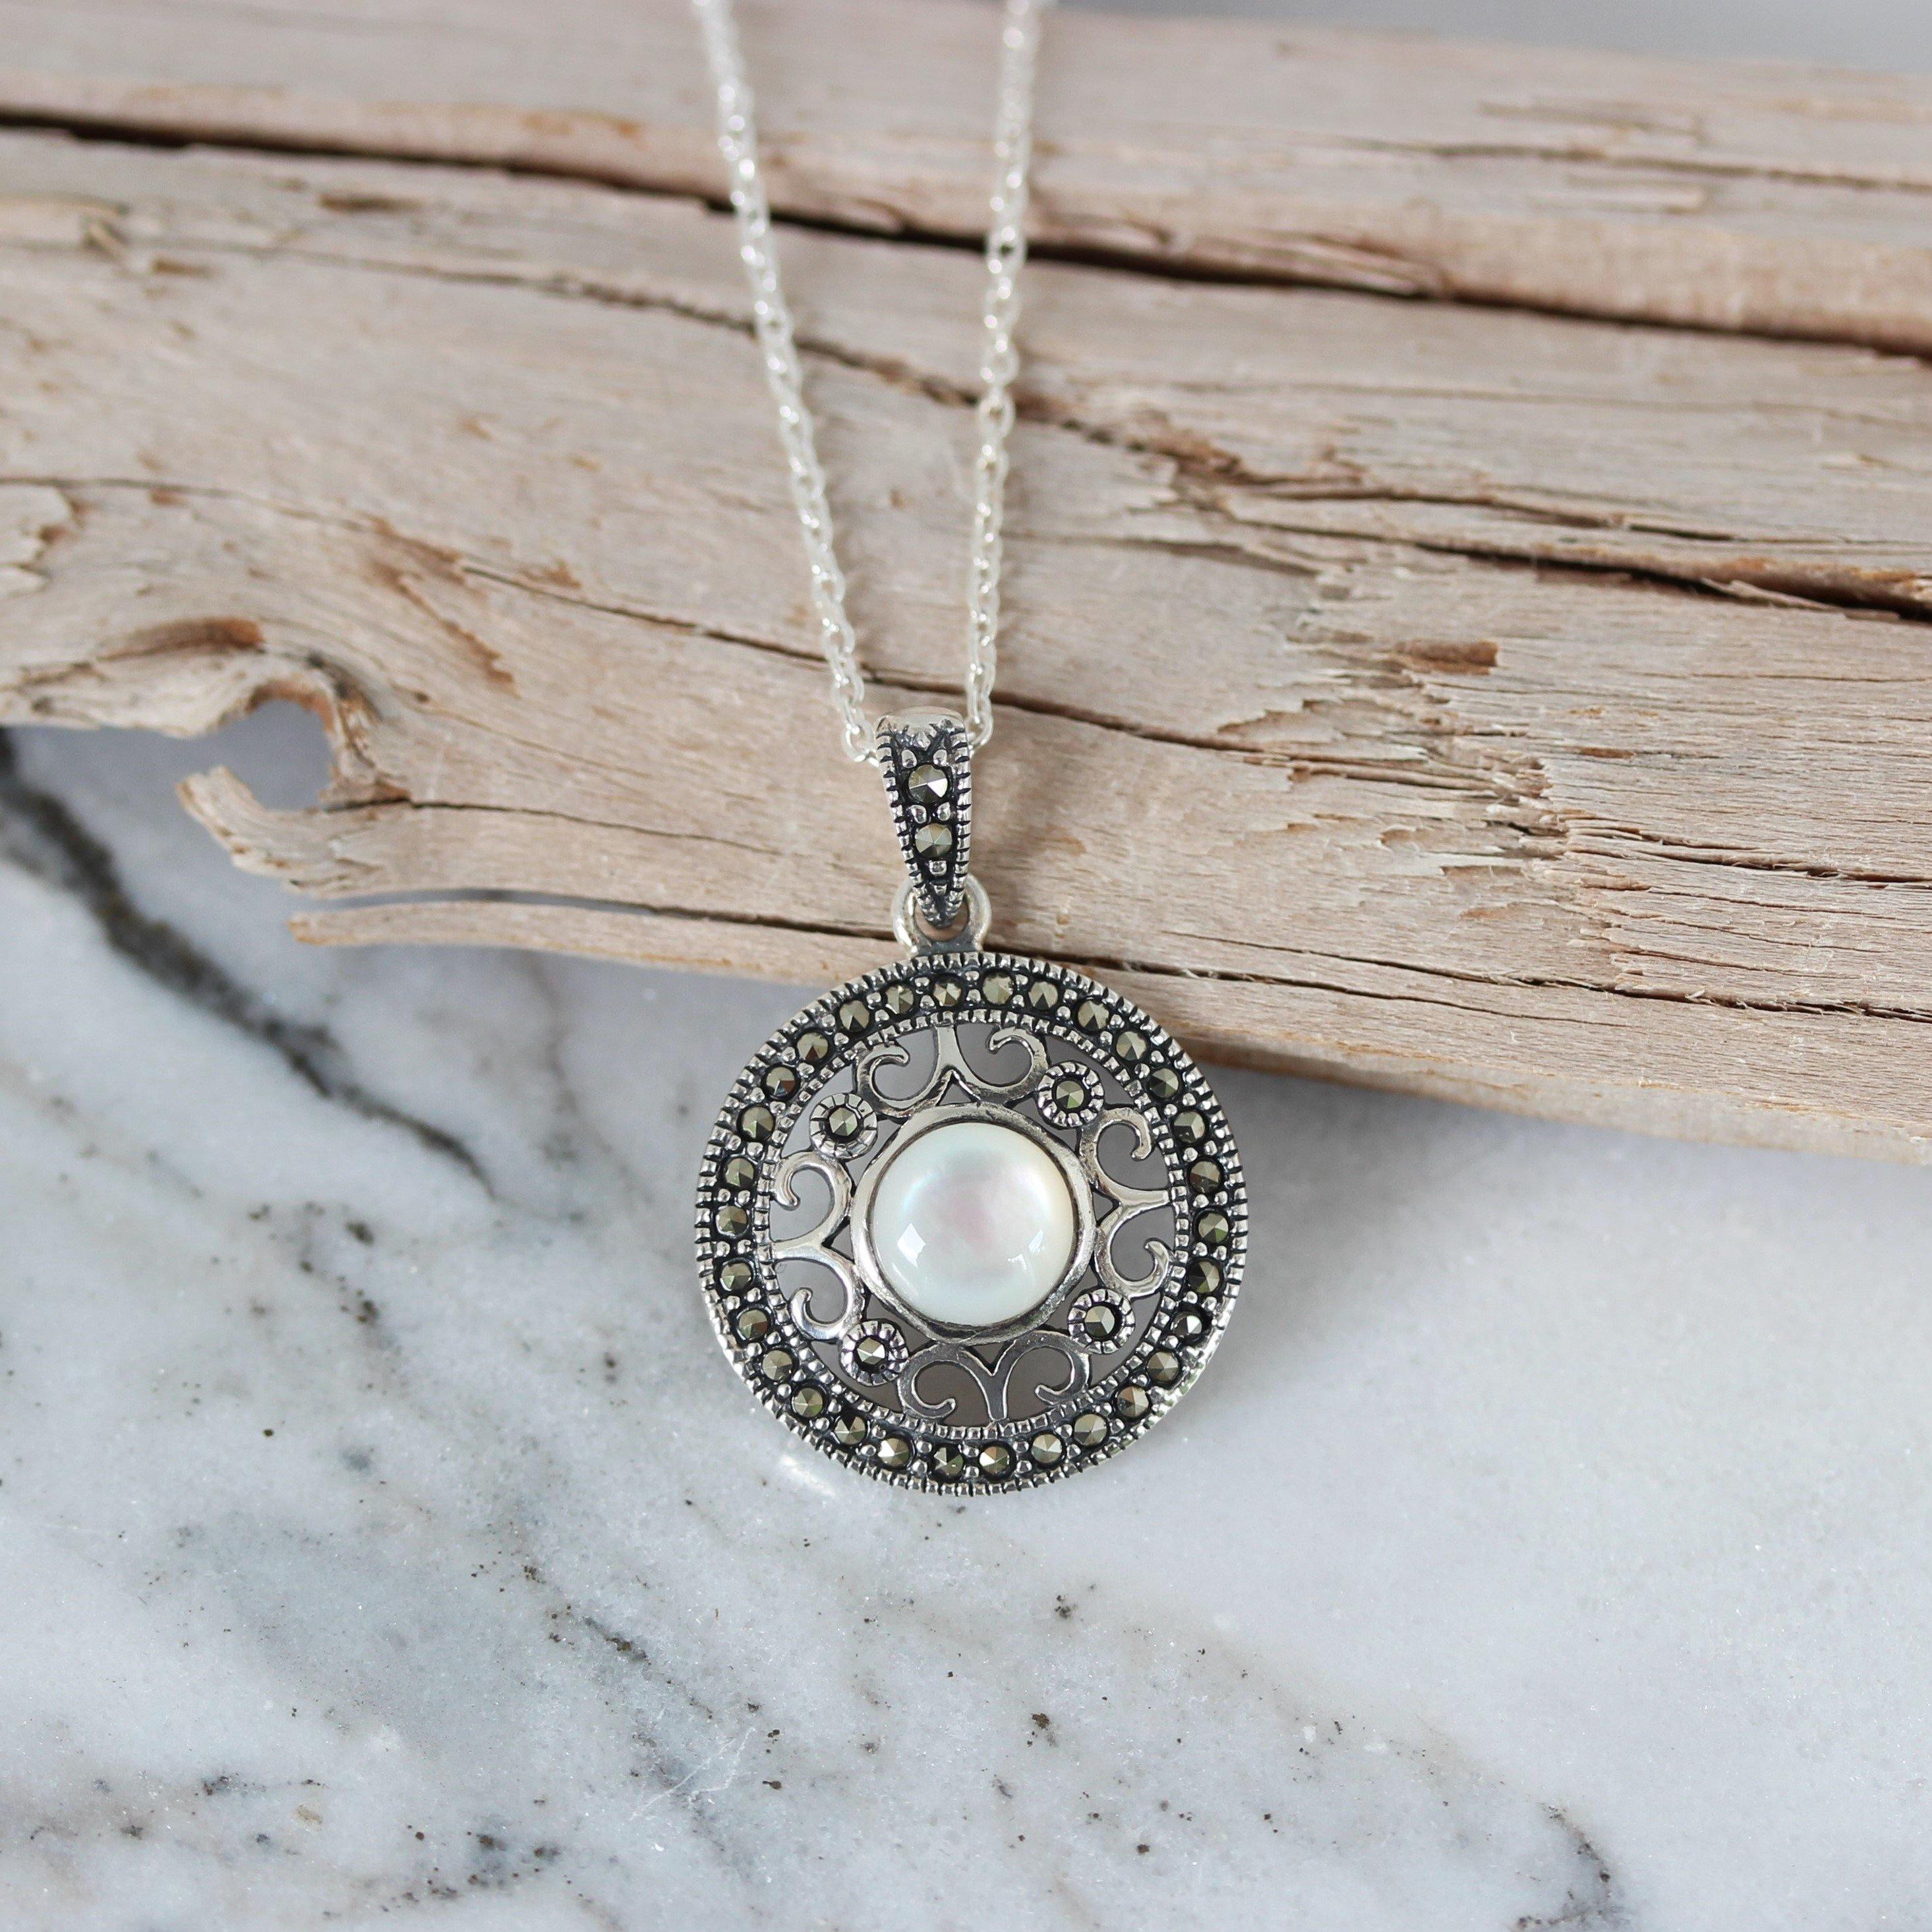 Sterling Silver Marcasite & Mother Of Pearl Round Filigree Pendant Necklace 42cm - STERLING SILVER DESIGNS